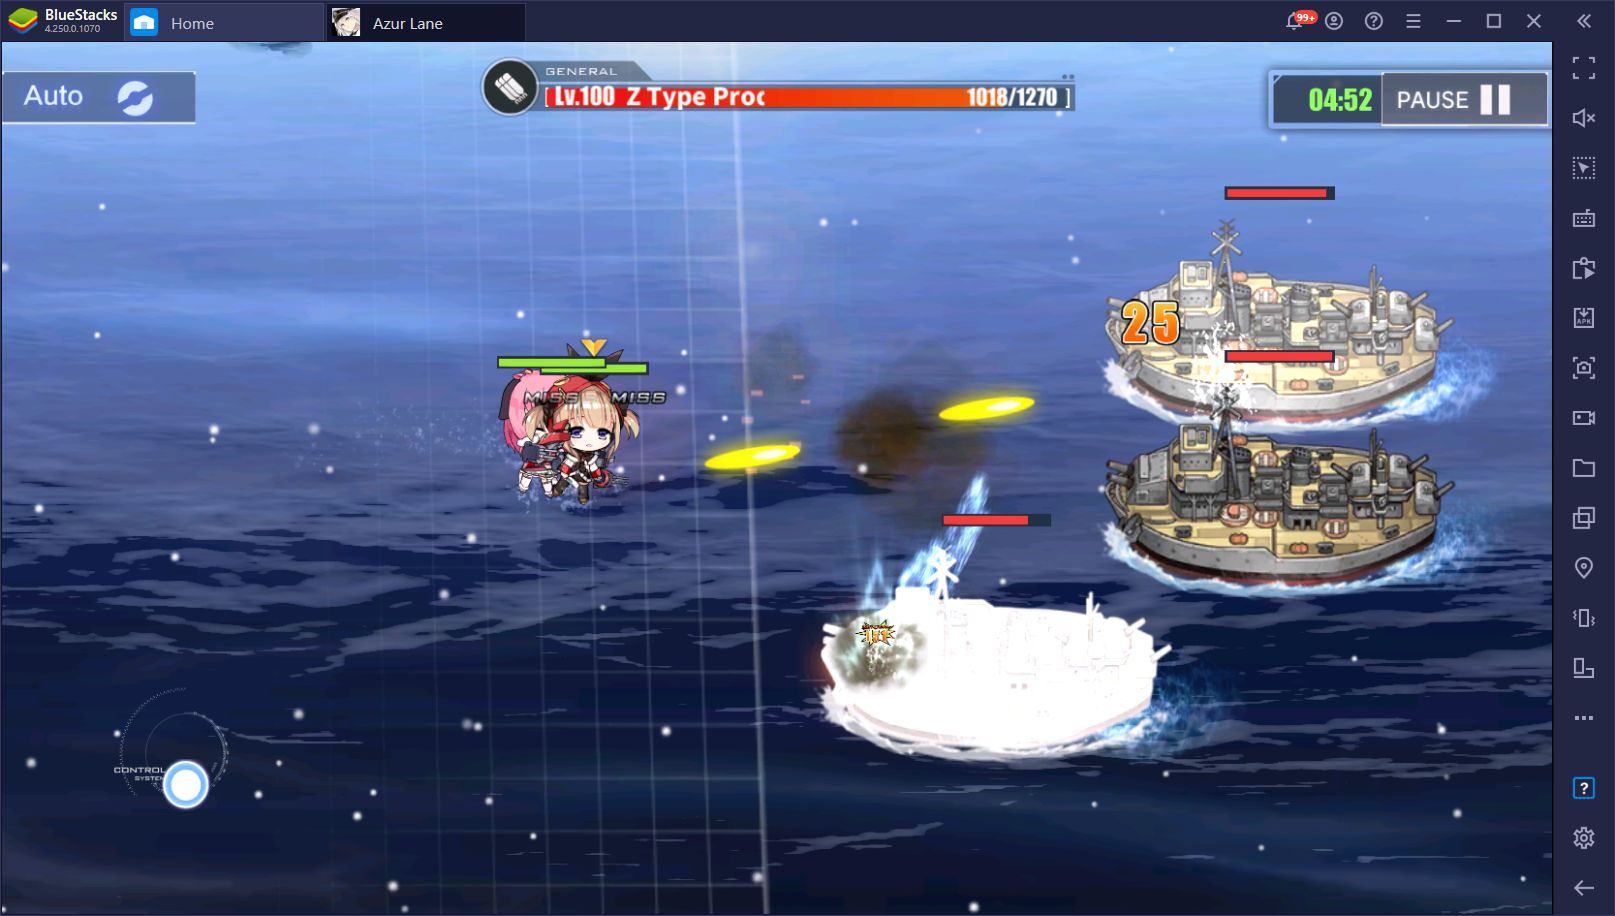 How to Play Azur Lane on PC with BlueStacks